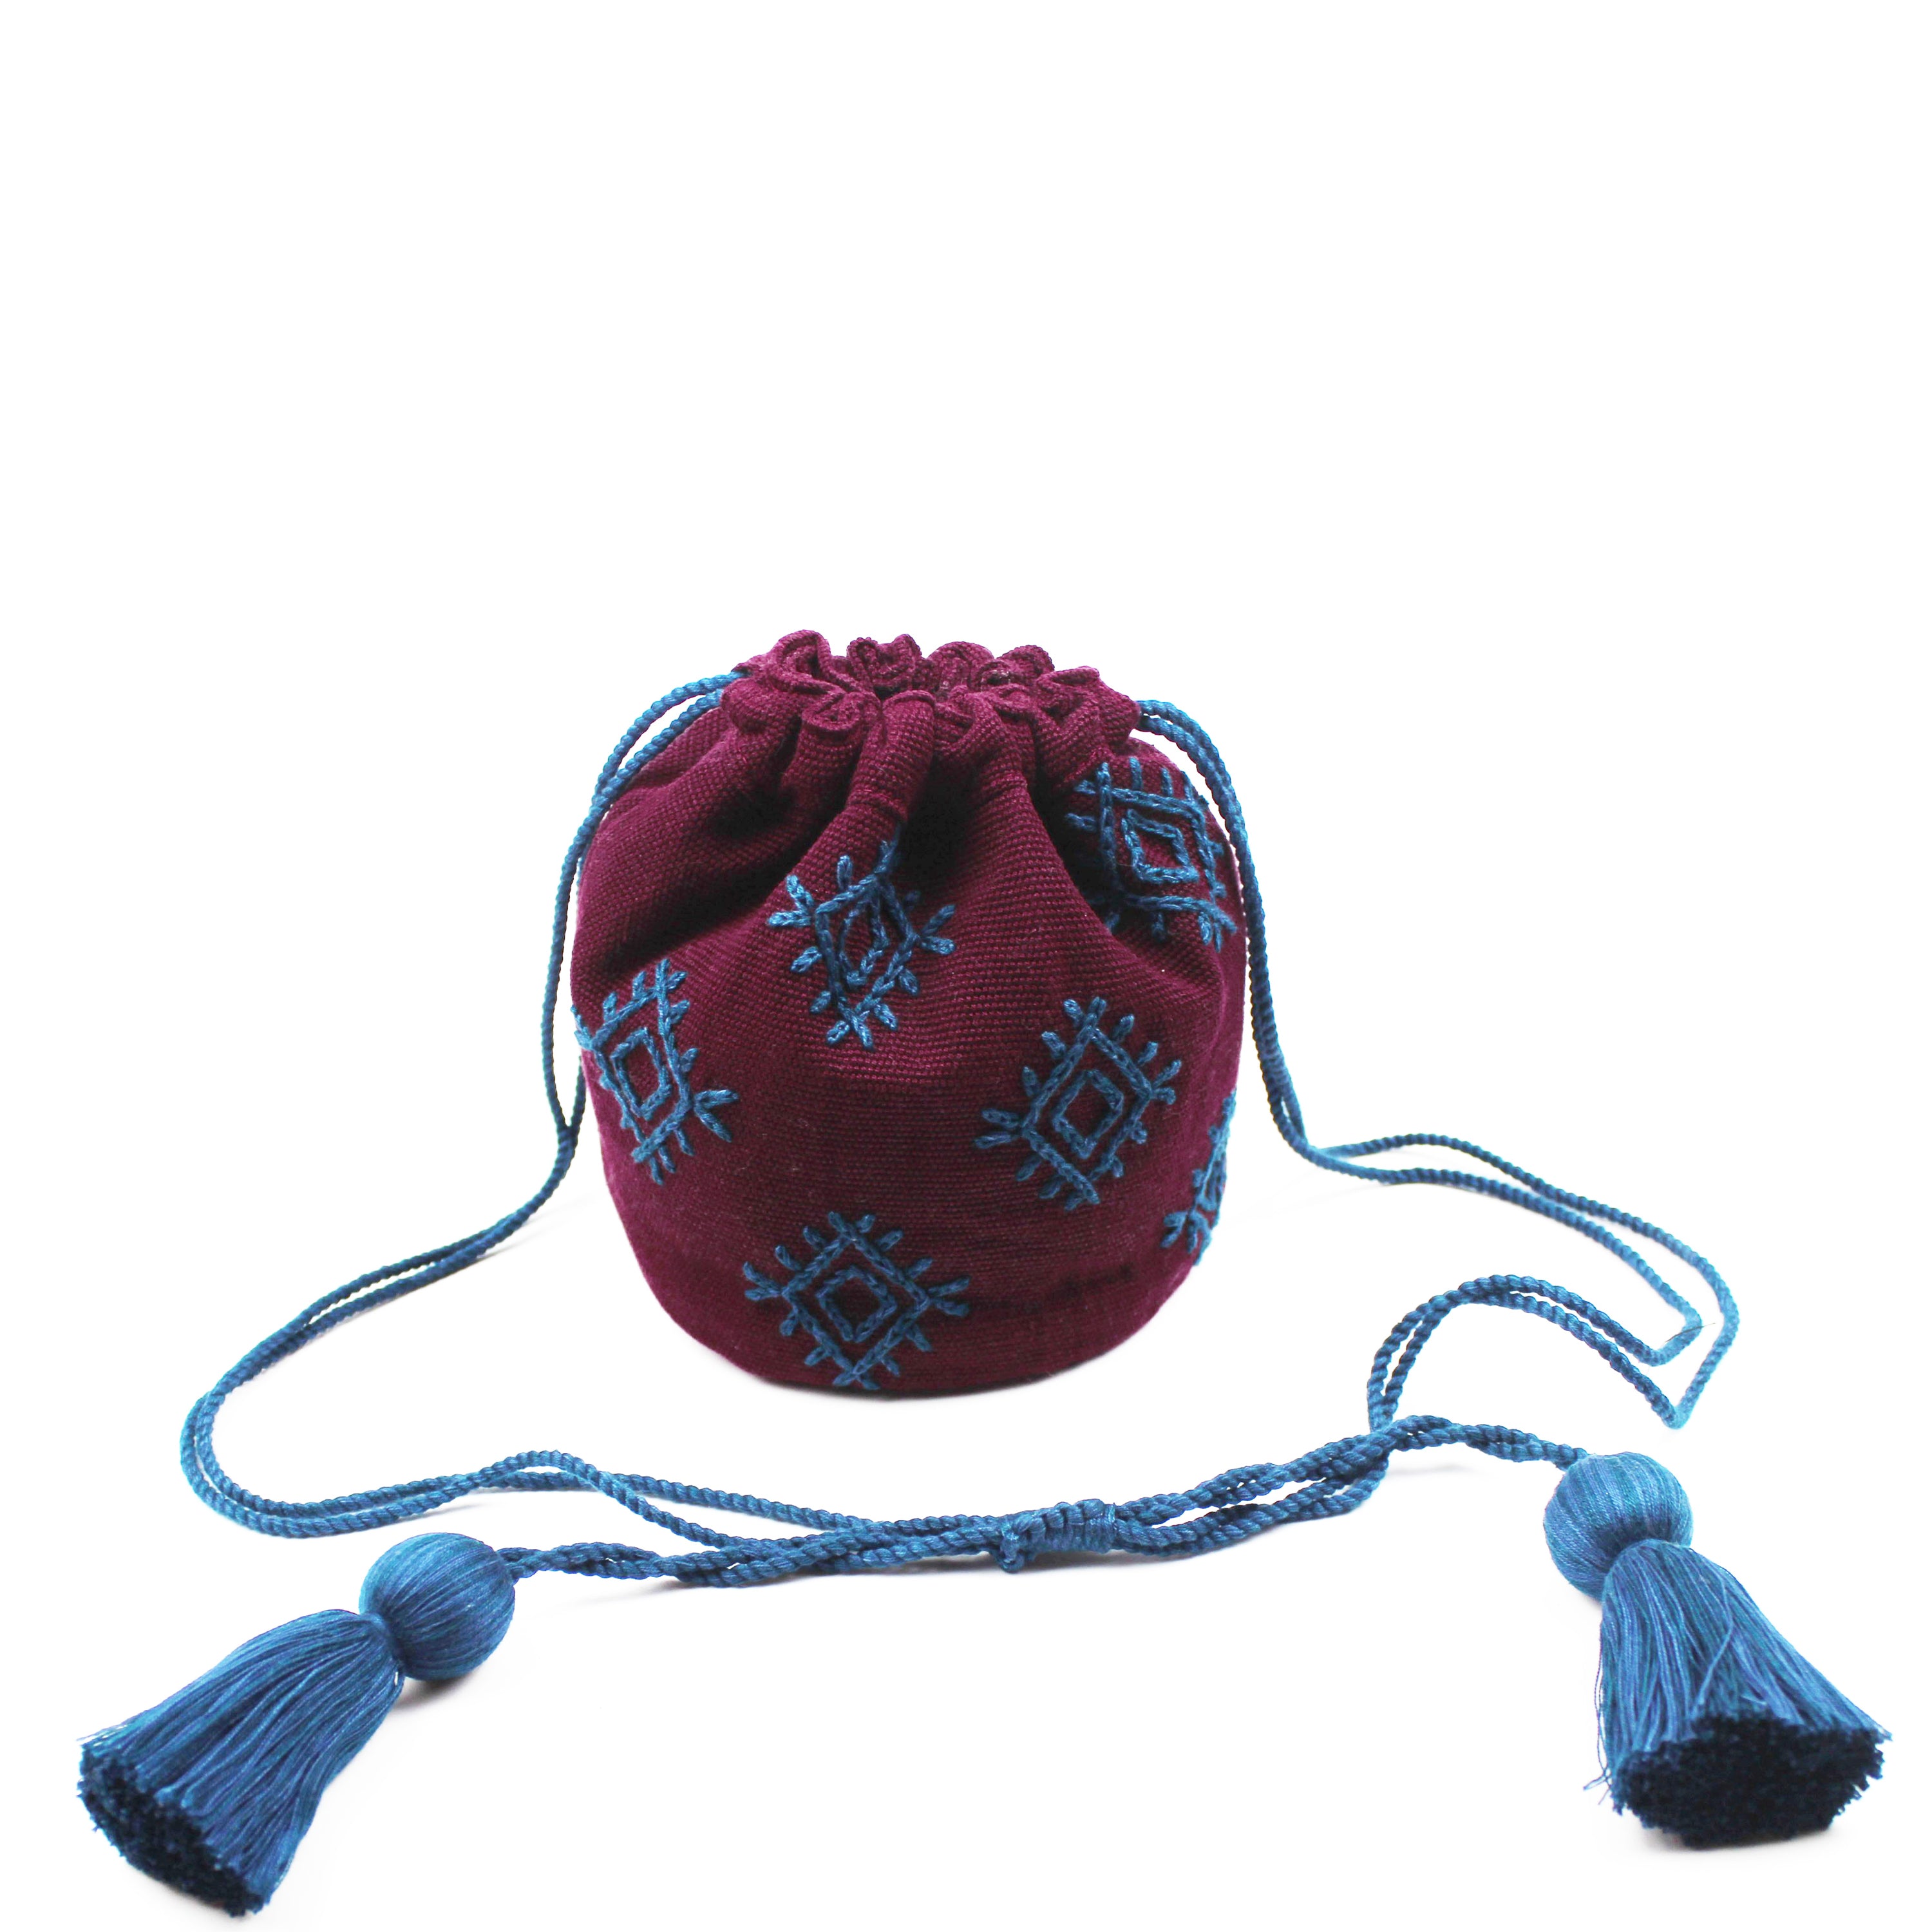 Hermelinda Handwoven Crossbody Mountain Dusk. The bucket bag is closed with a blue drawstring attached to tassels. The Mountain Dusk pattern has blue embroidered diamond shapes over a maroon background.